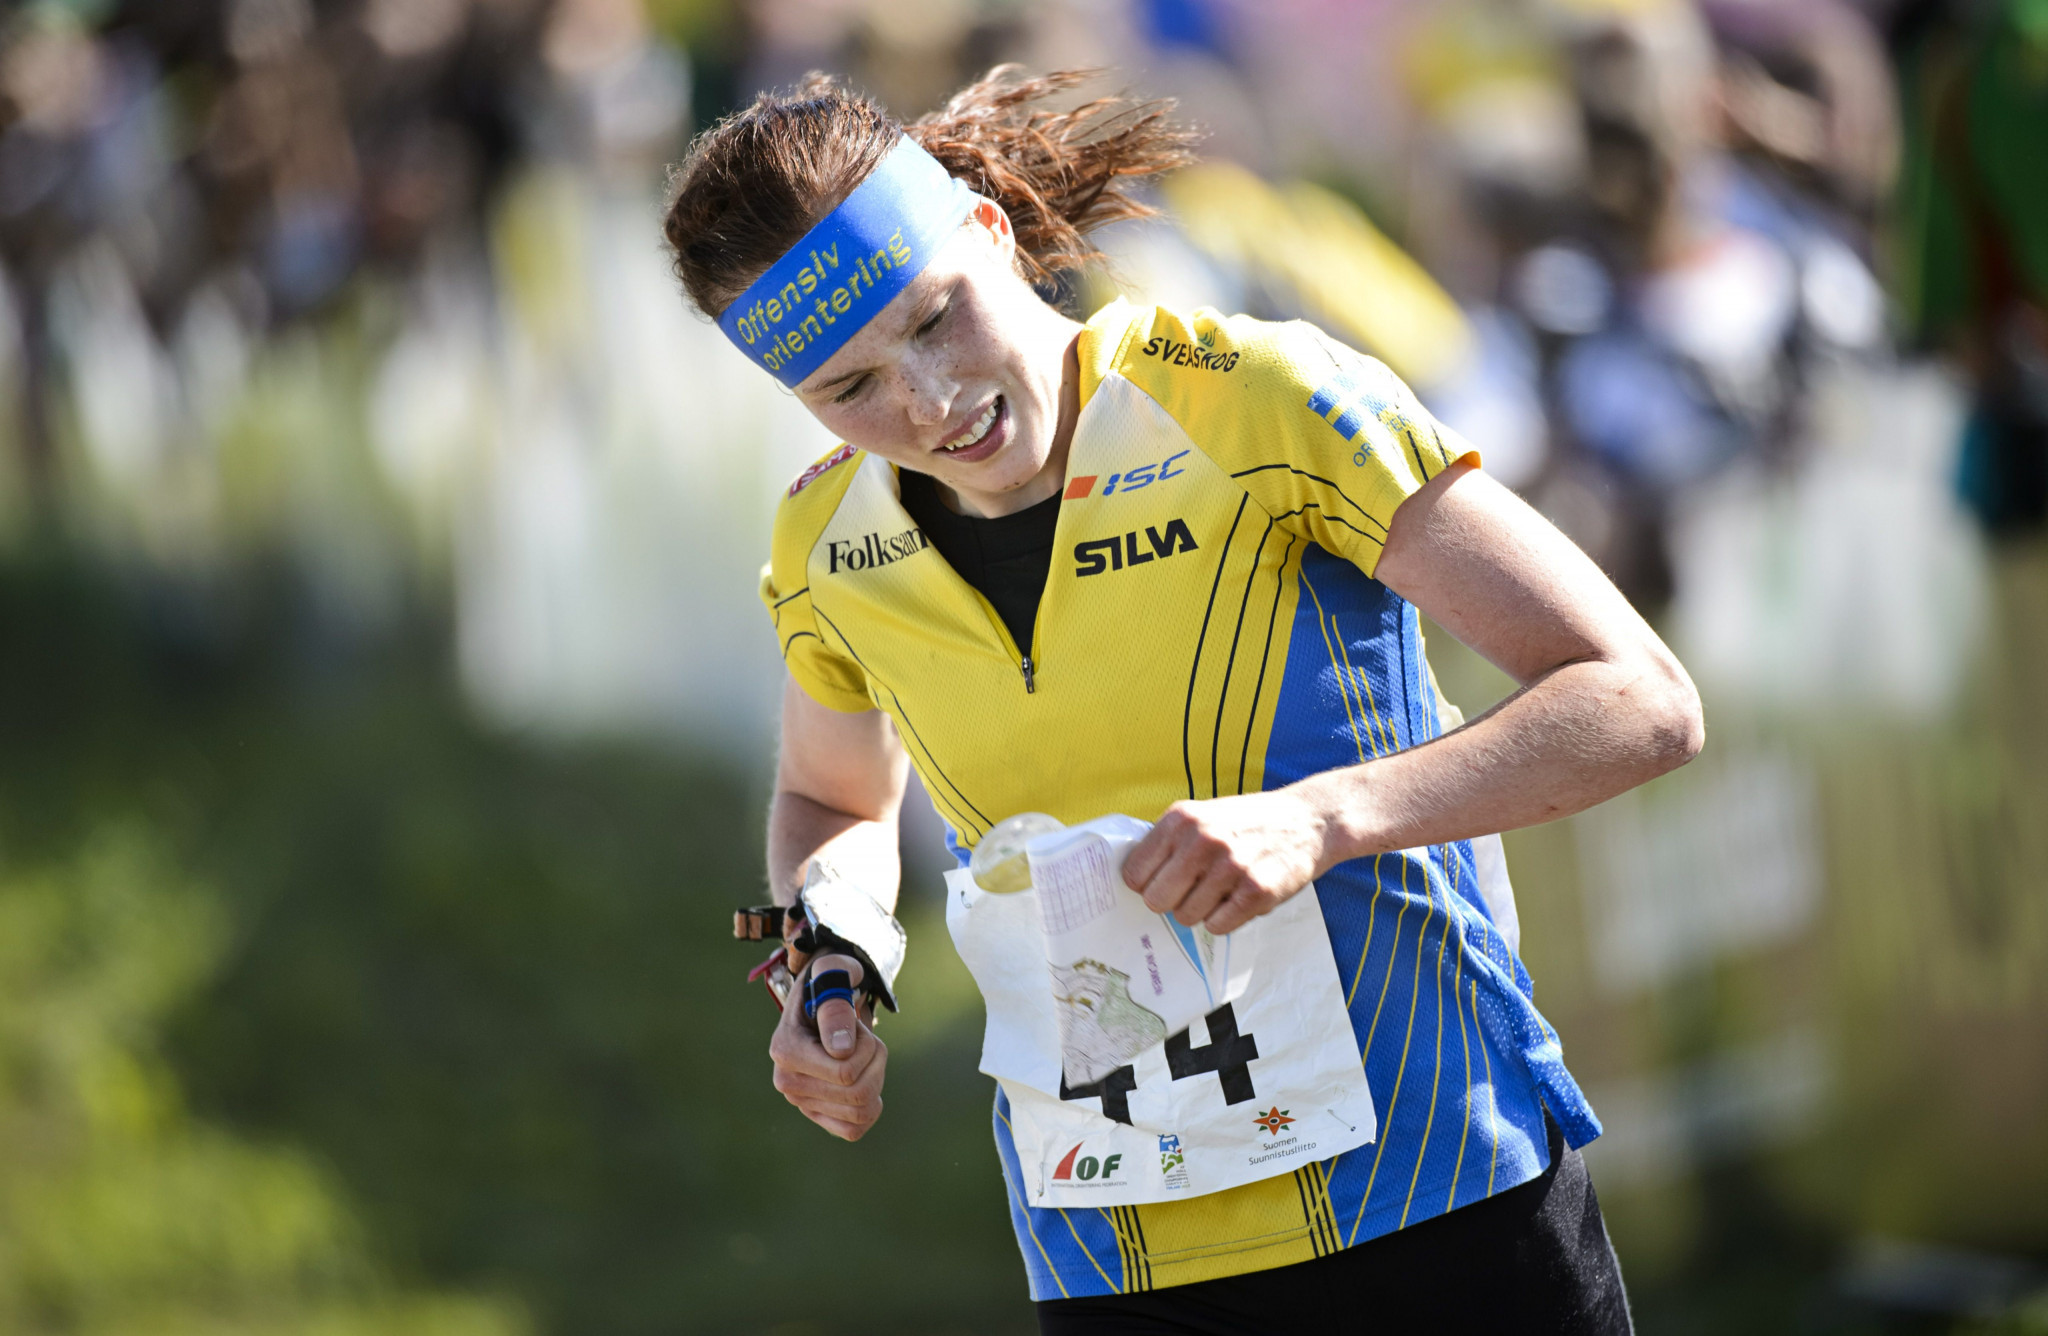 Alexandersson dominant in middle-distance Orienteering World Cup race in Laufen